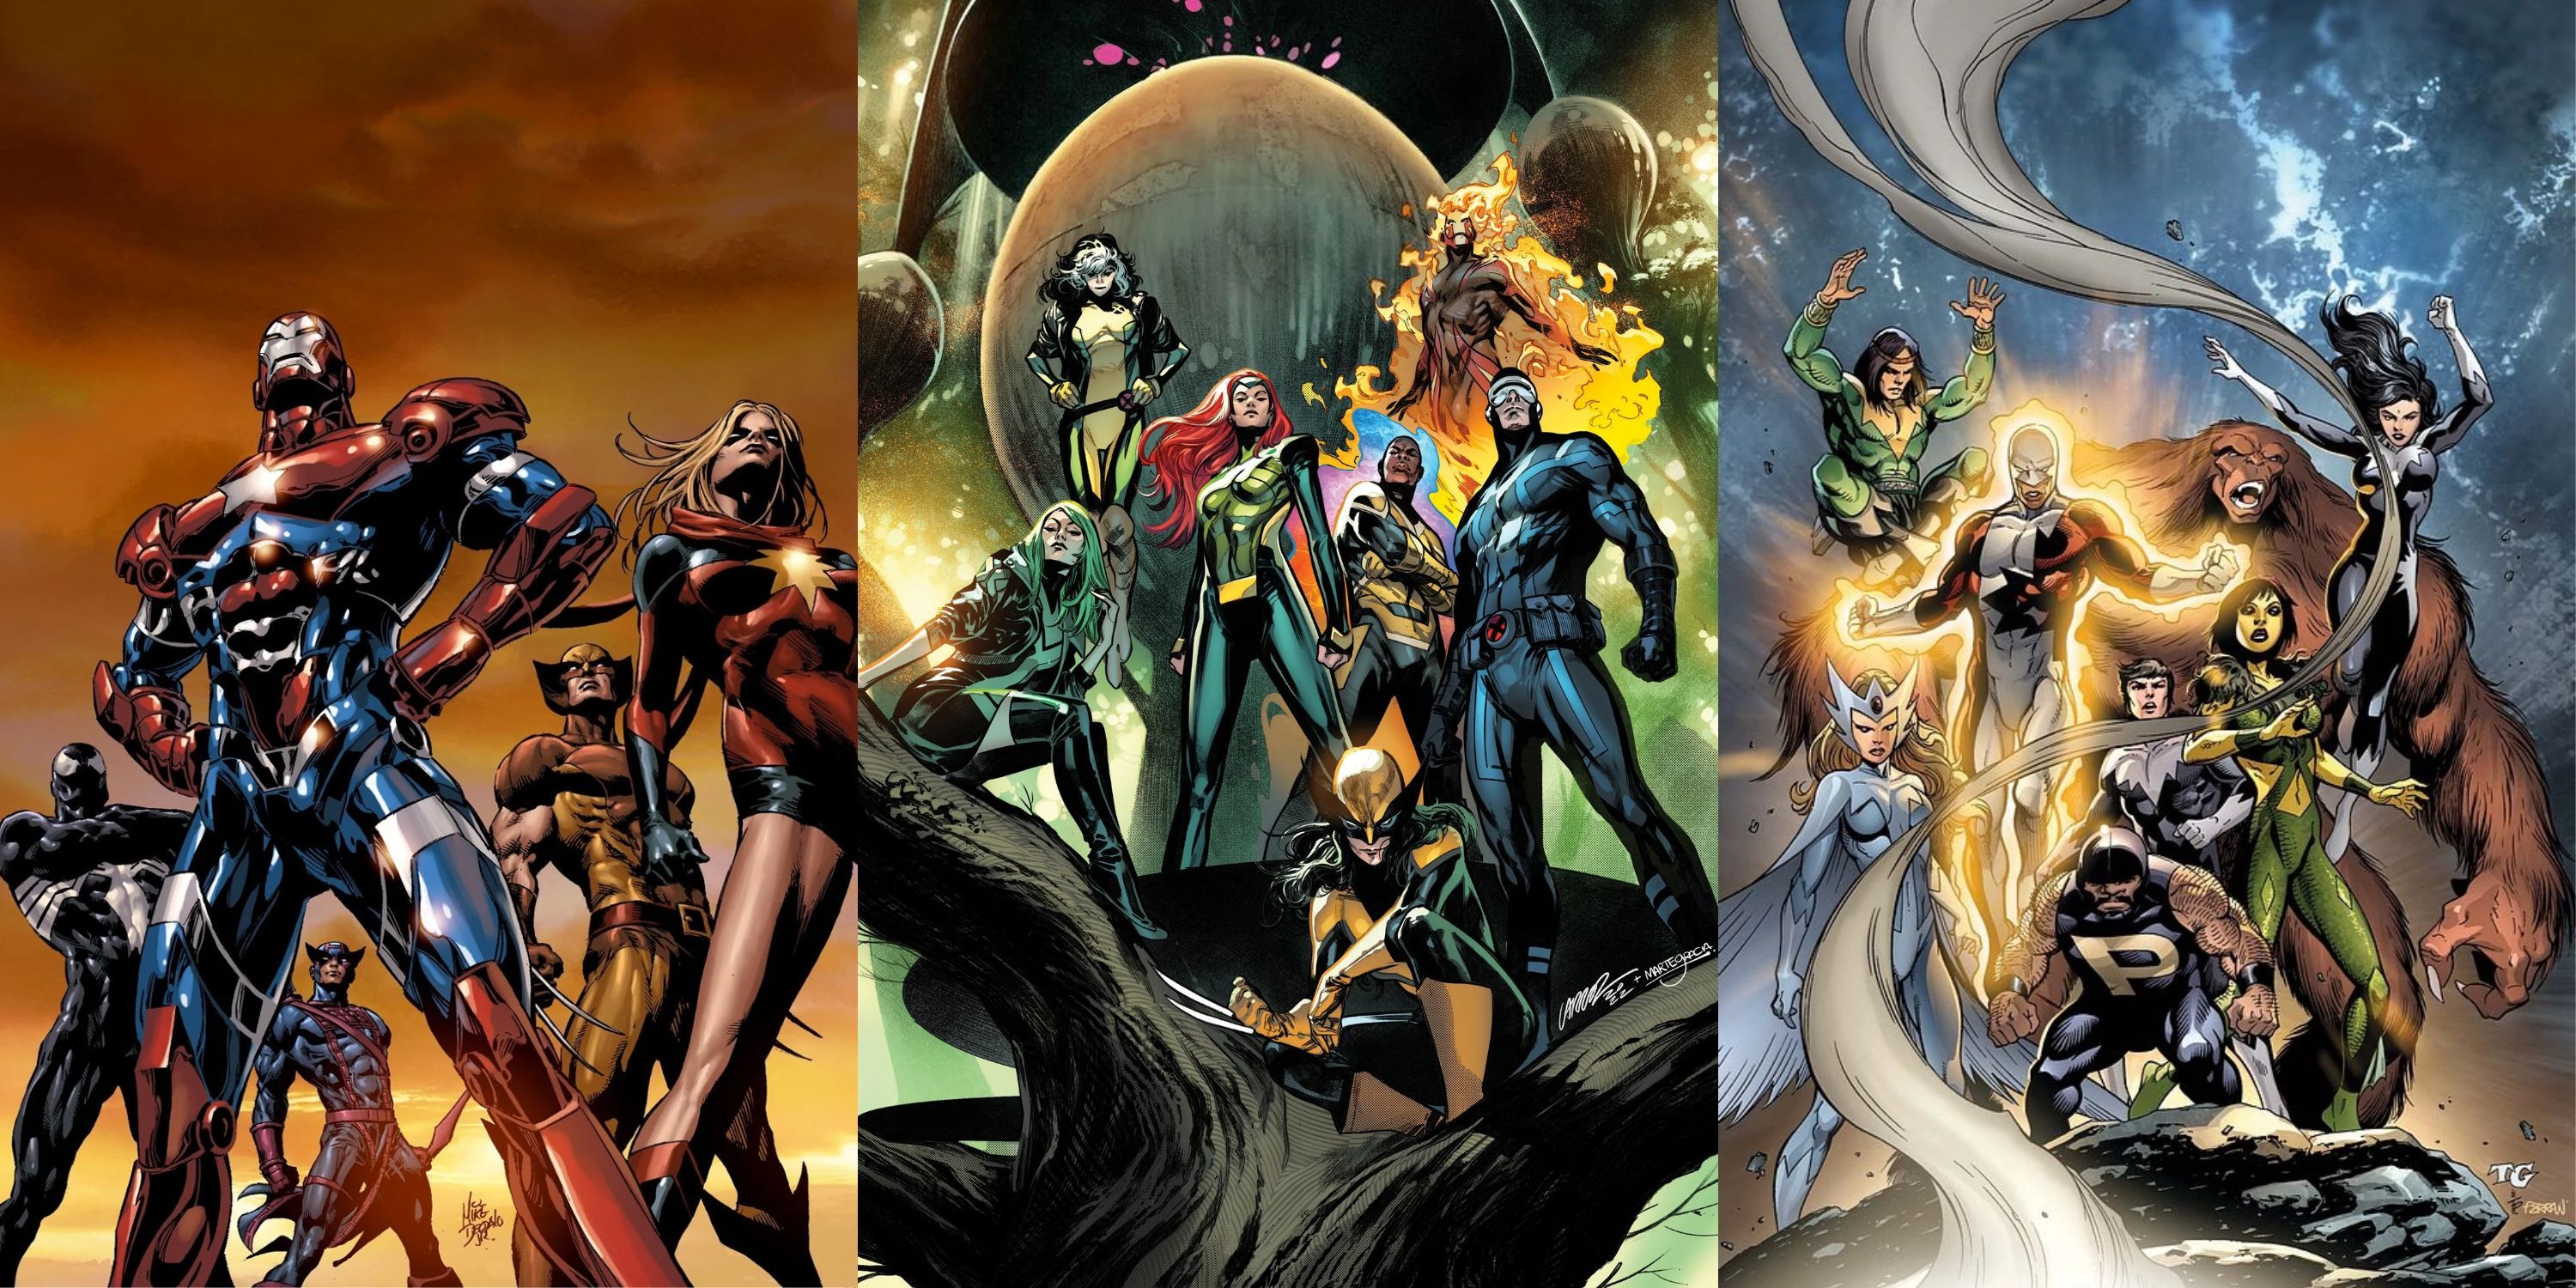 Thunderbolts: 10 Best Superhero/Supervillain Teams Not Yet In The MCU